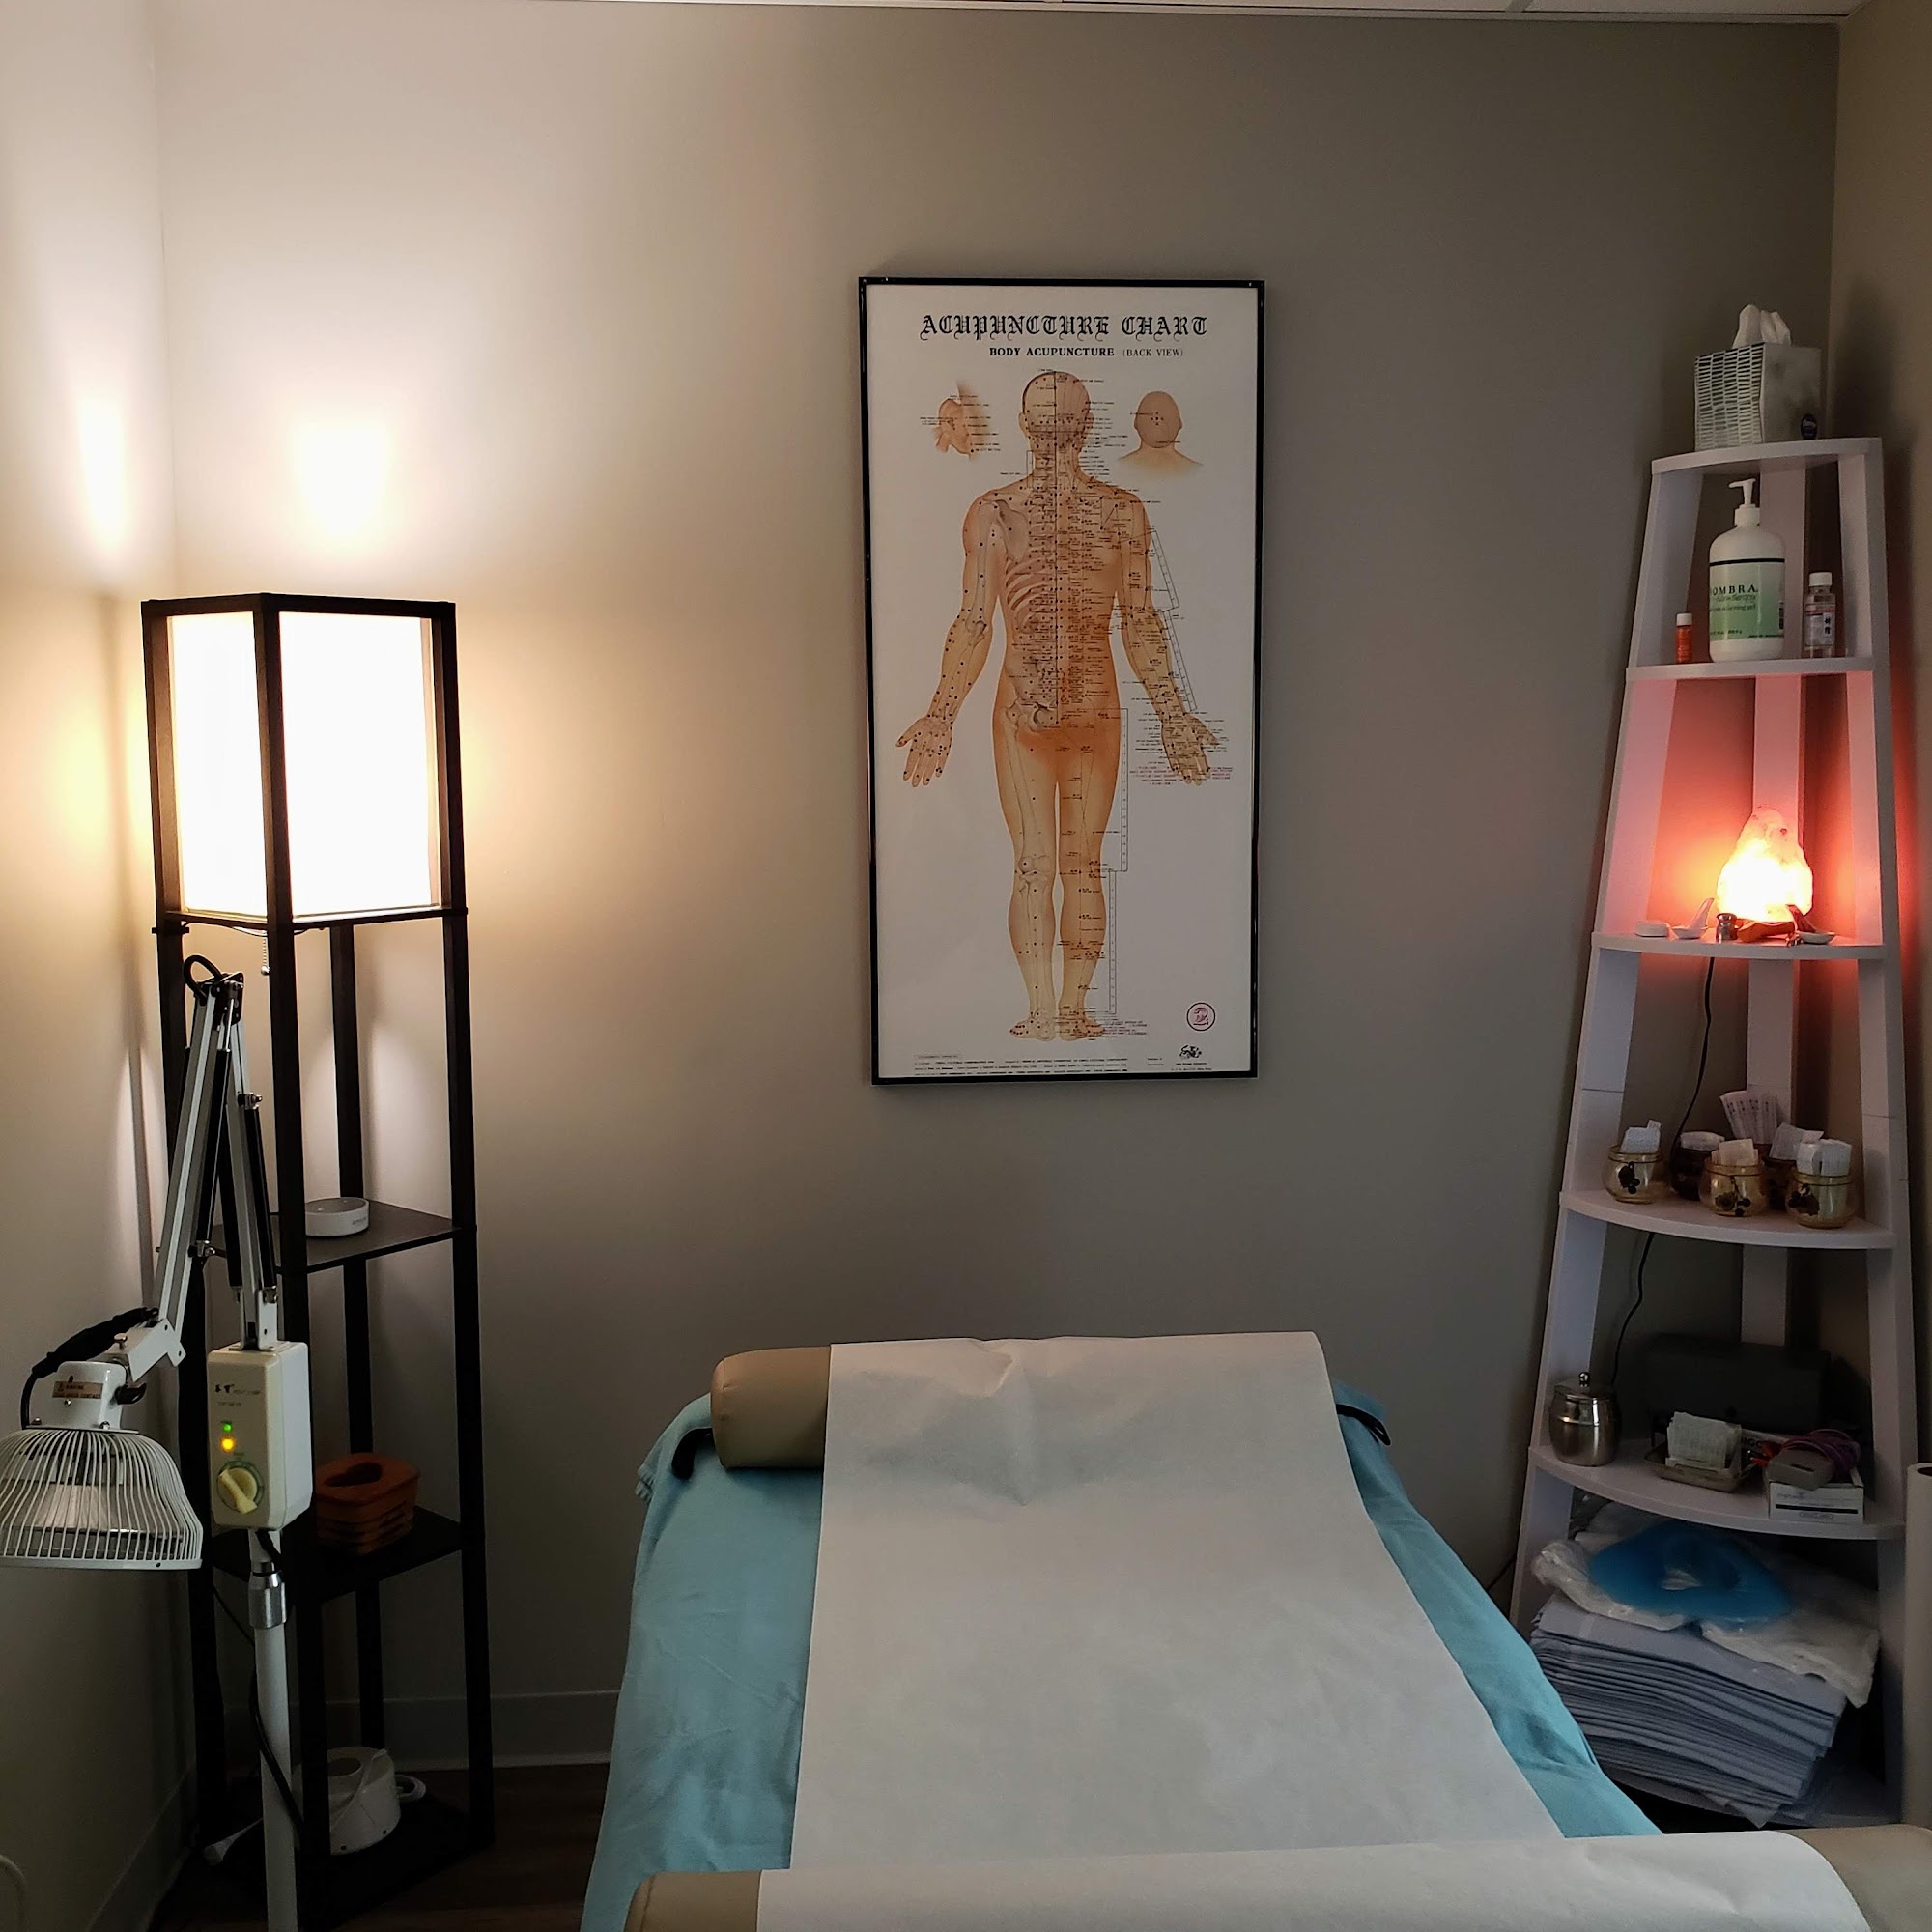 Healing Points Acupuncture & Wellness Center, Dr. Michelle Iona, DACM, L.Ac.